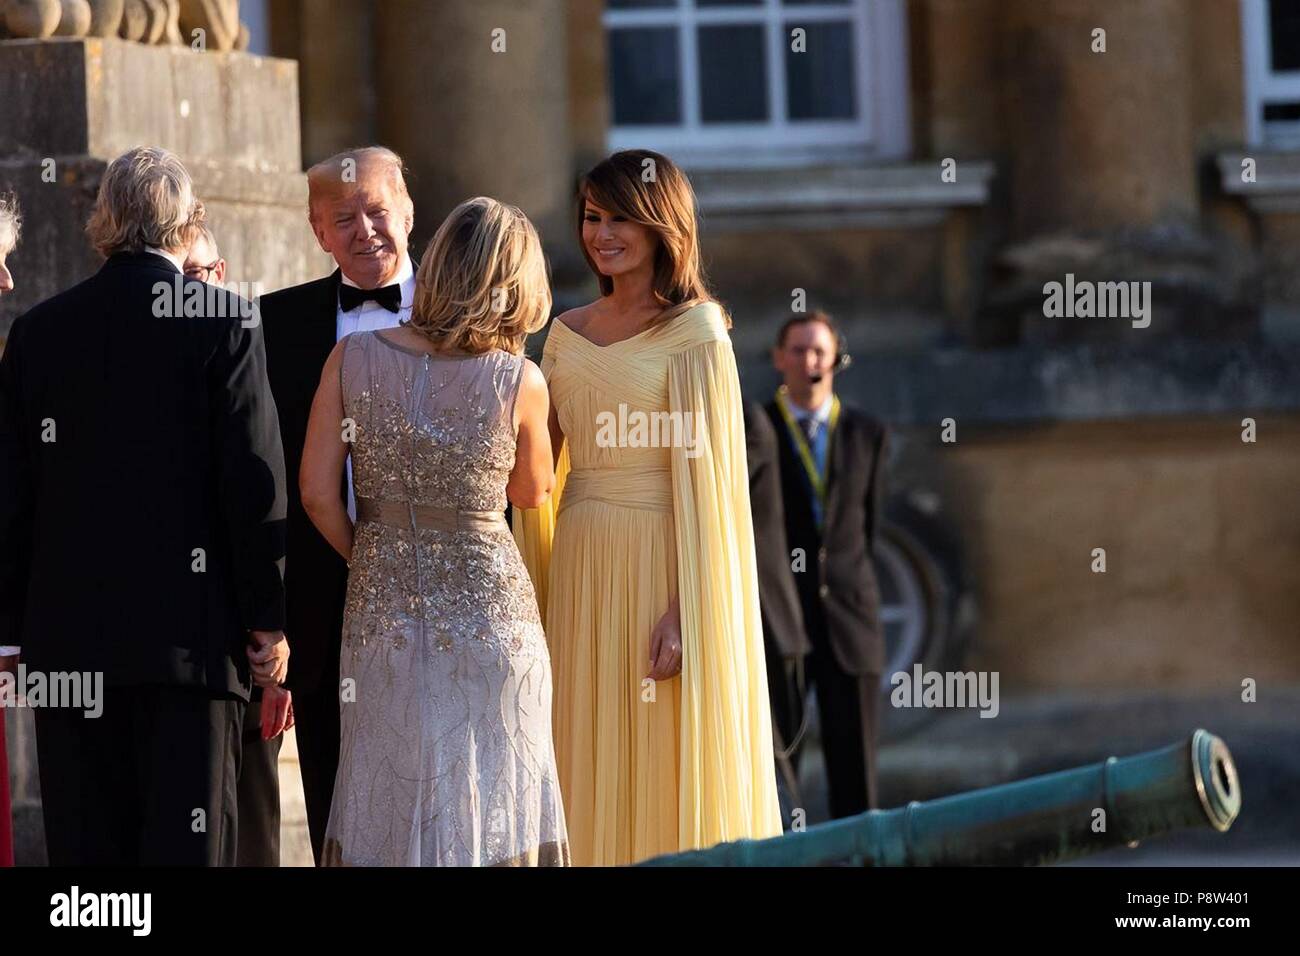 London, UK, 13 July 2018. U.S President Donald Trump and First Lady Melania Trump during the arrival ceremony for dinner at Blenheim Palace hosted by British Prime Minister Theresa May July 12, 2018 in Oxfordshire, England. Credit: Planetpix/Alamy Live News Stock Photo